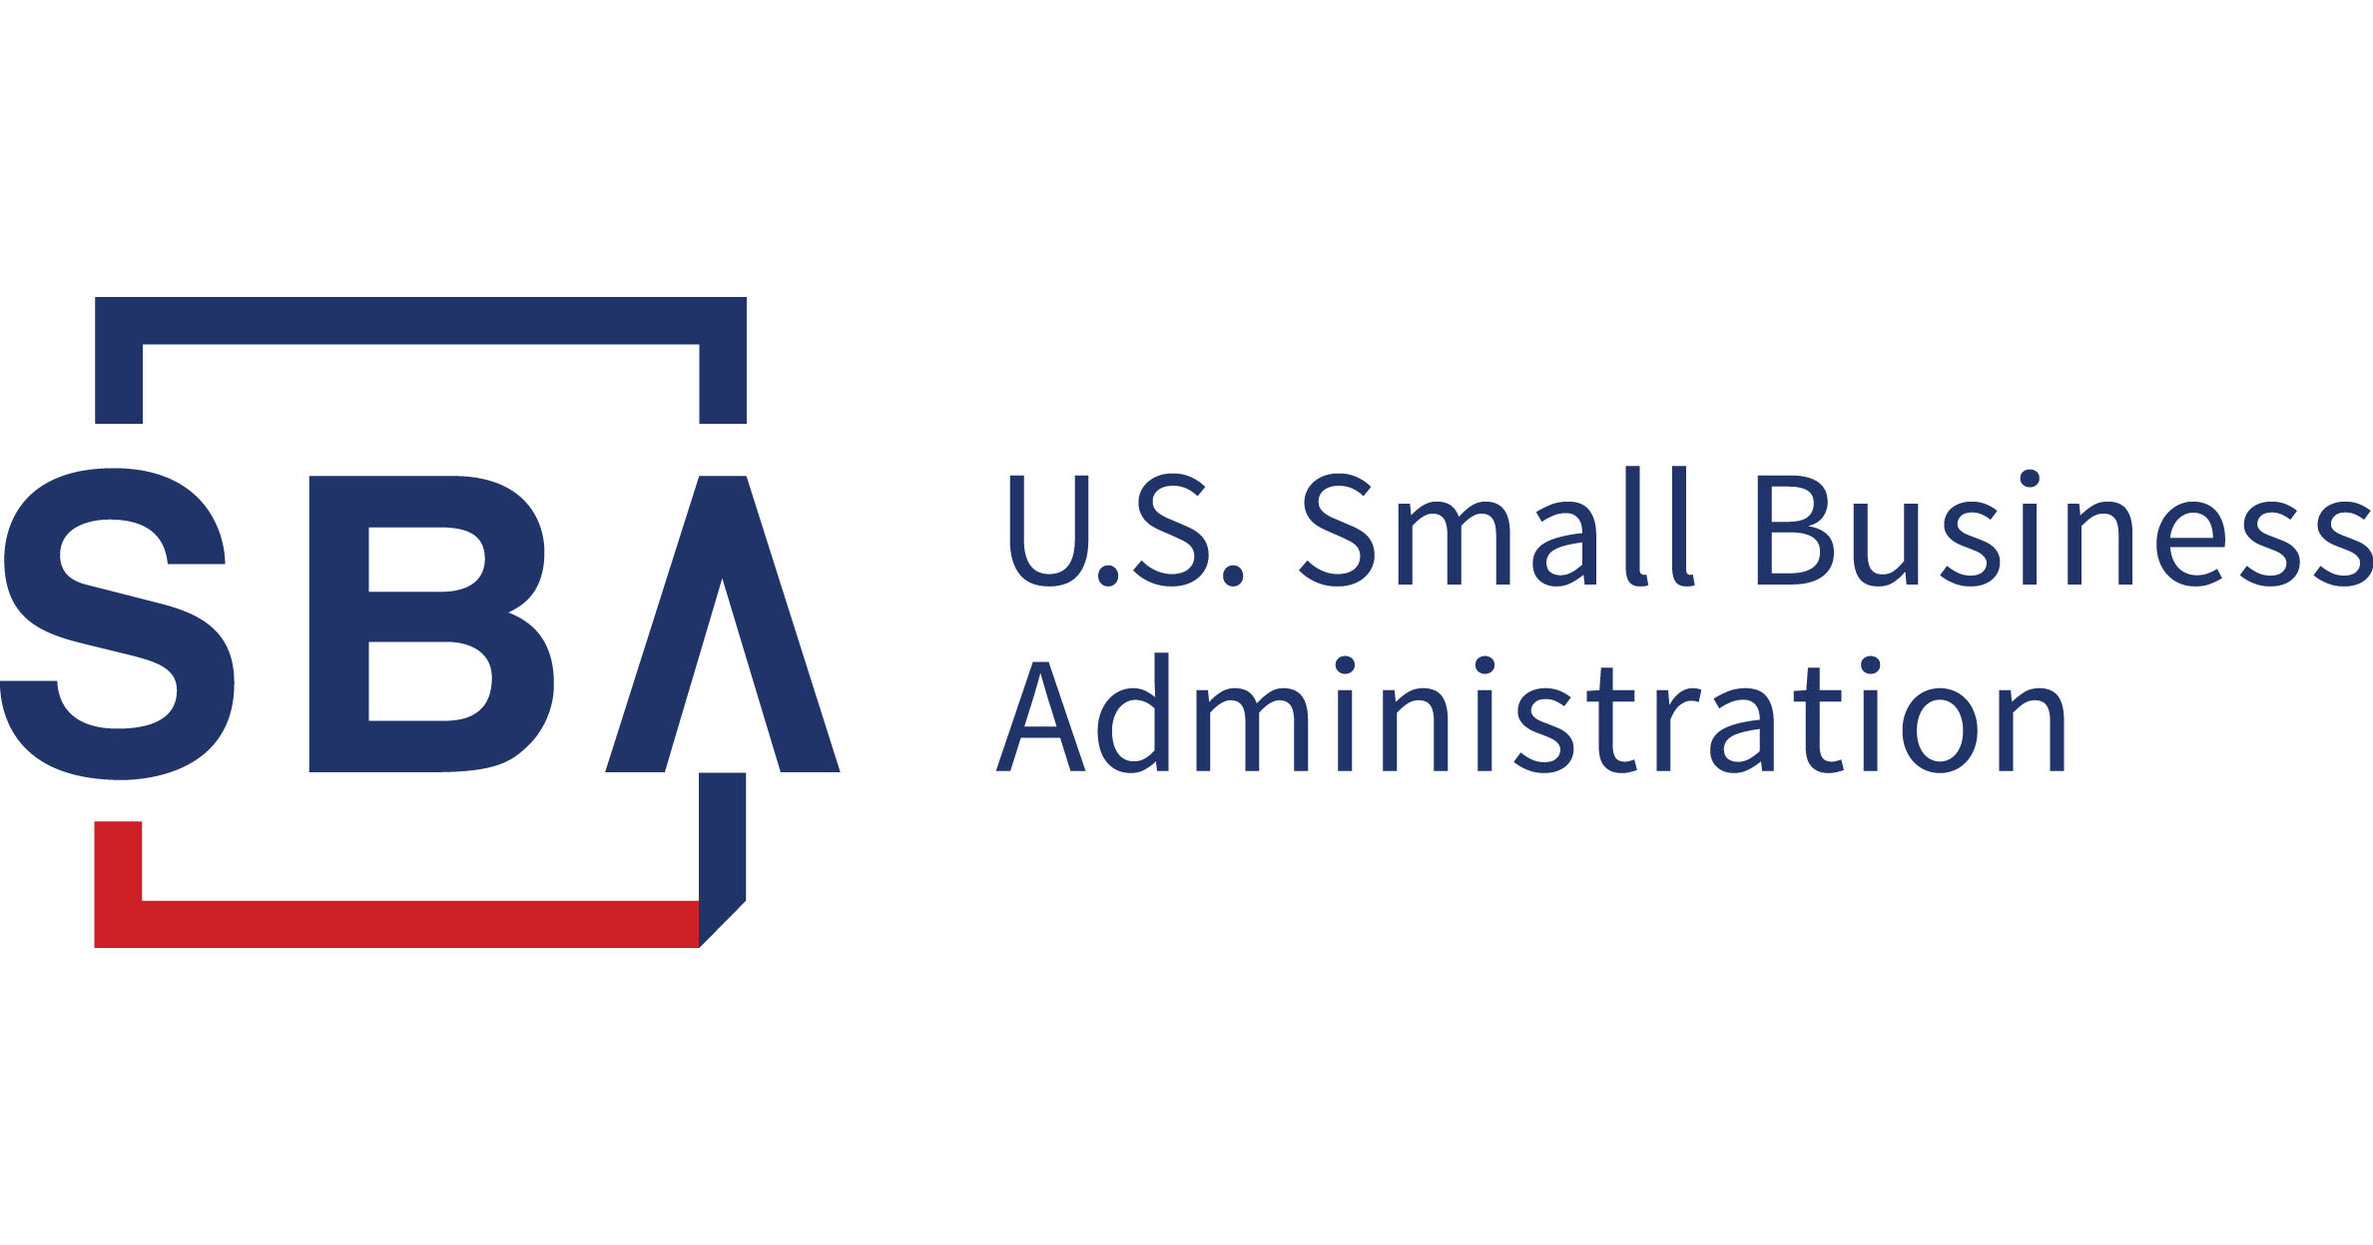 SBA OFFERS LOANS TO SMALL BUSINESSES